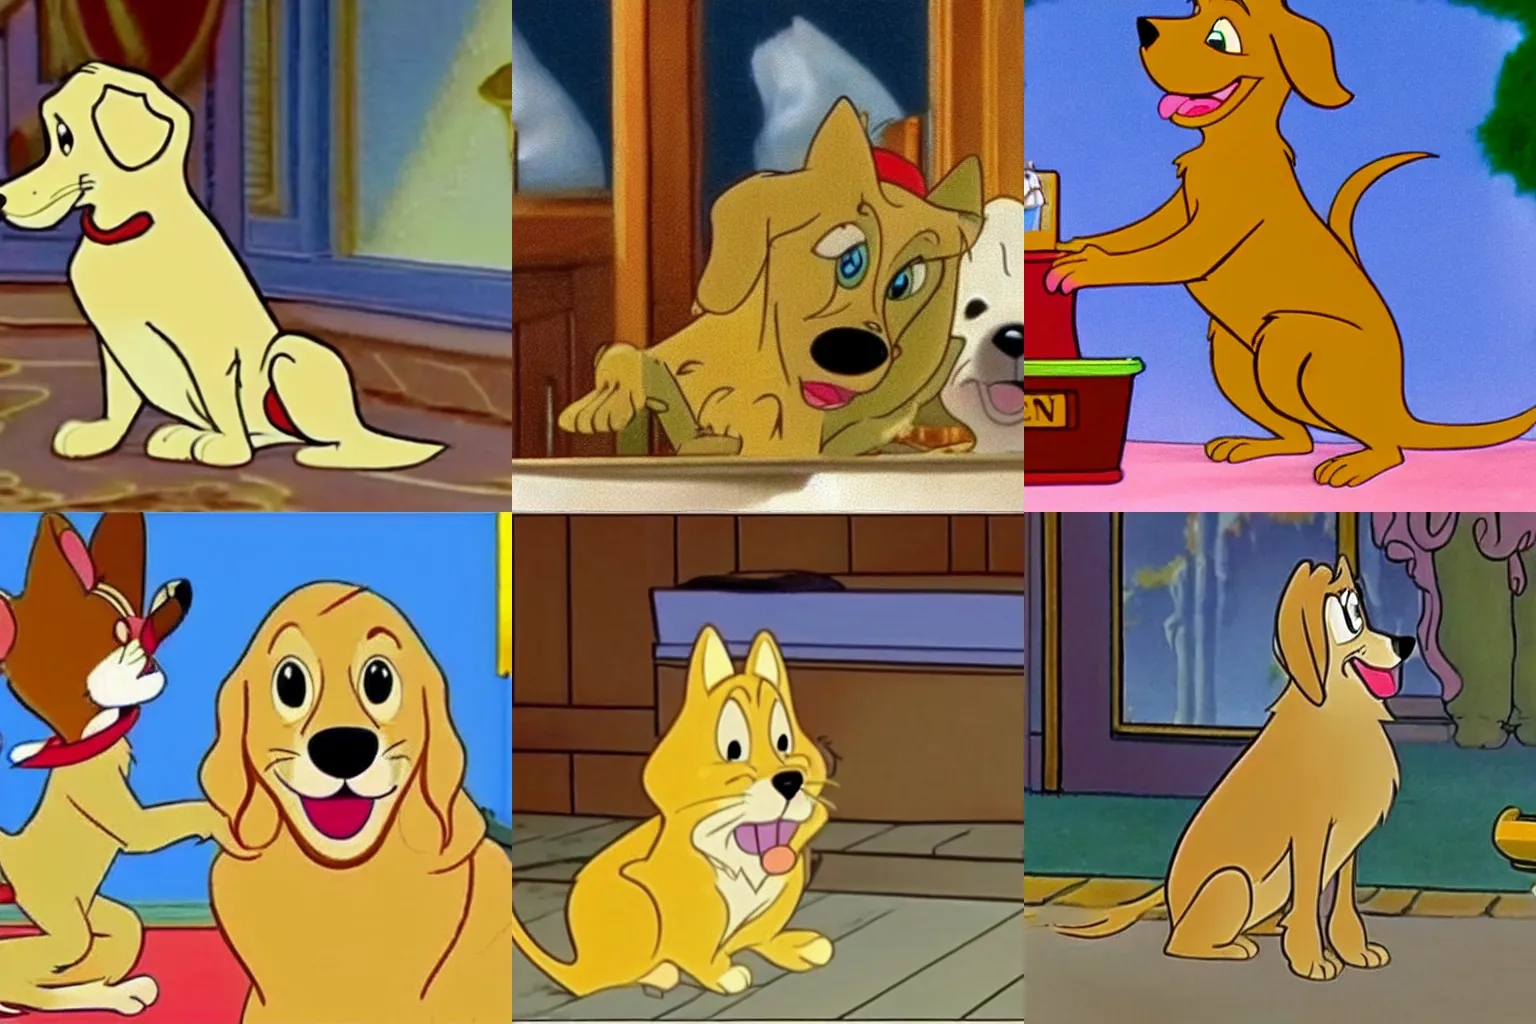 Prompt: a golden retriever in the of Tom and Jerry cartoon